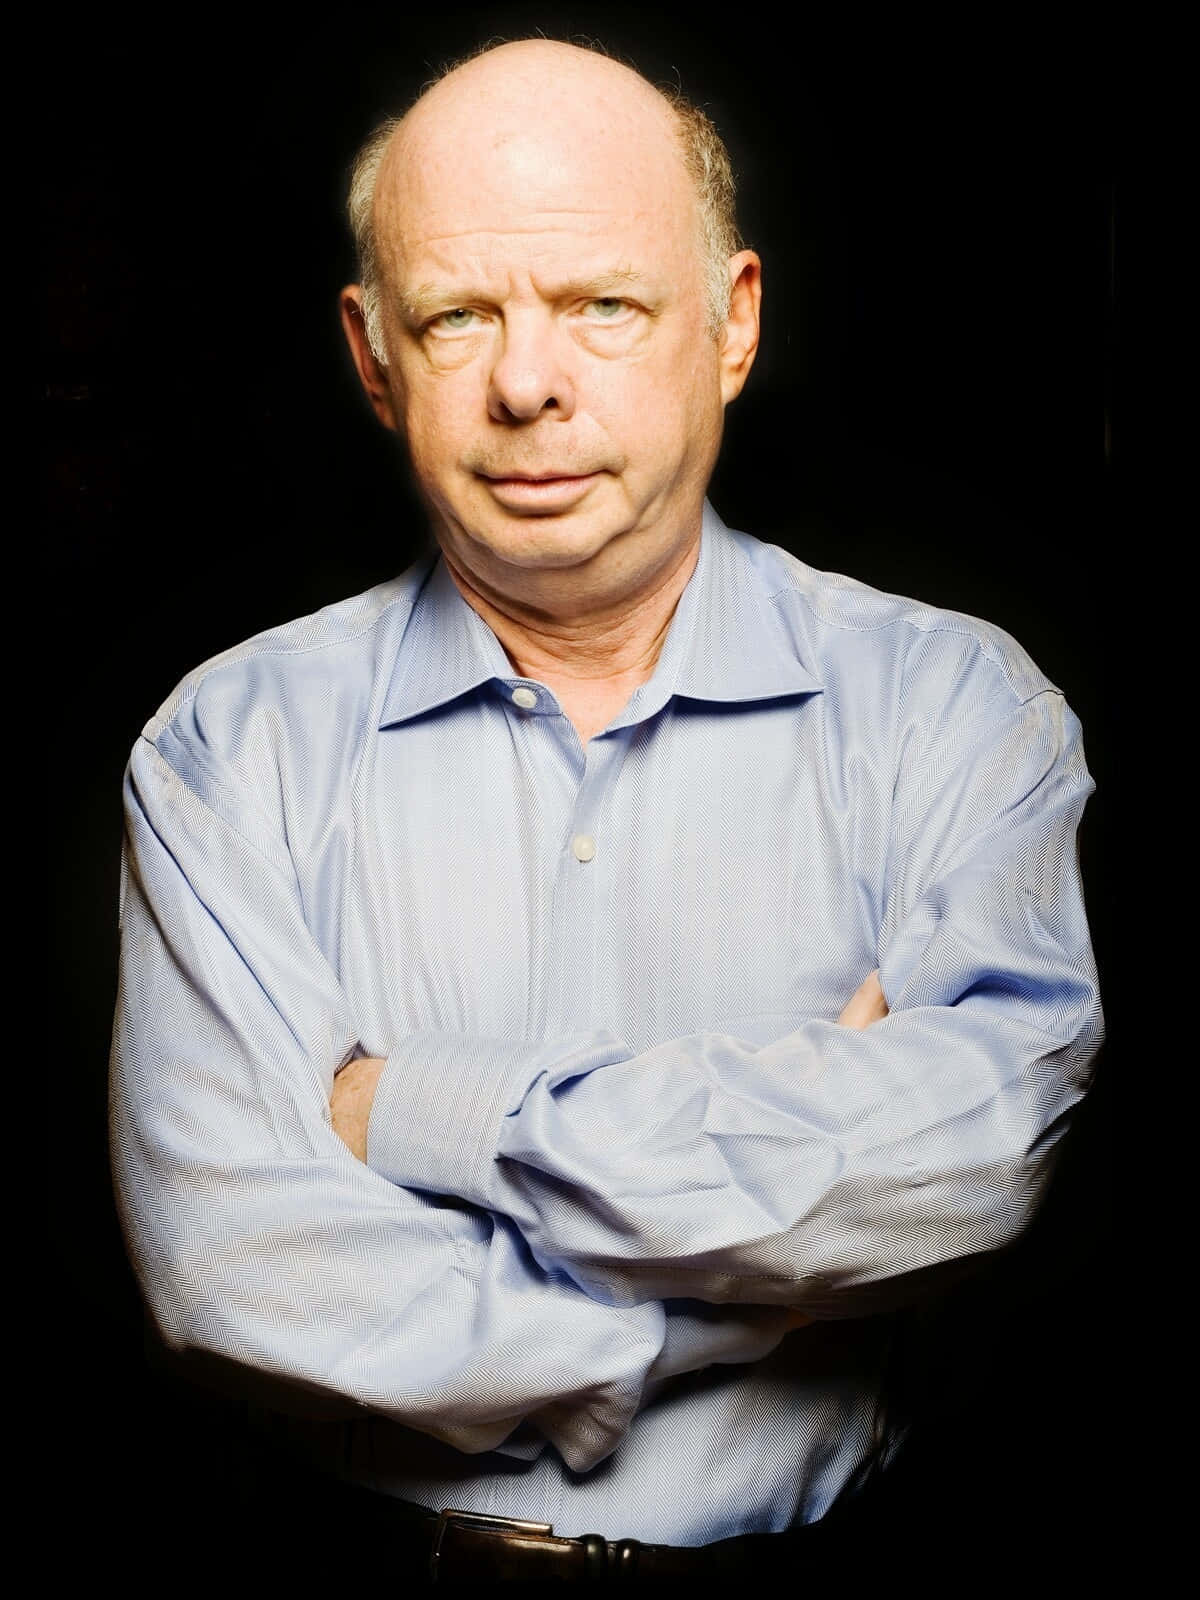 Caption: Wallace Shawn, renowned actor and playwright, posing for a photoshoot. Wallpaper